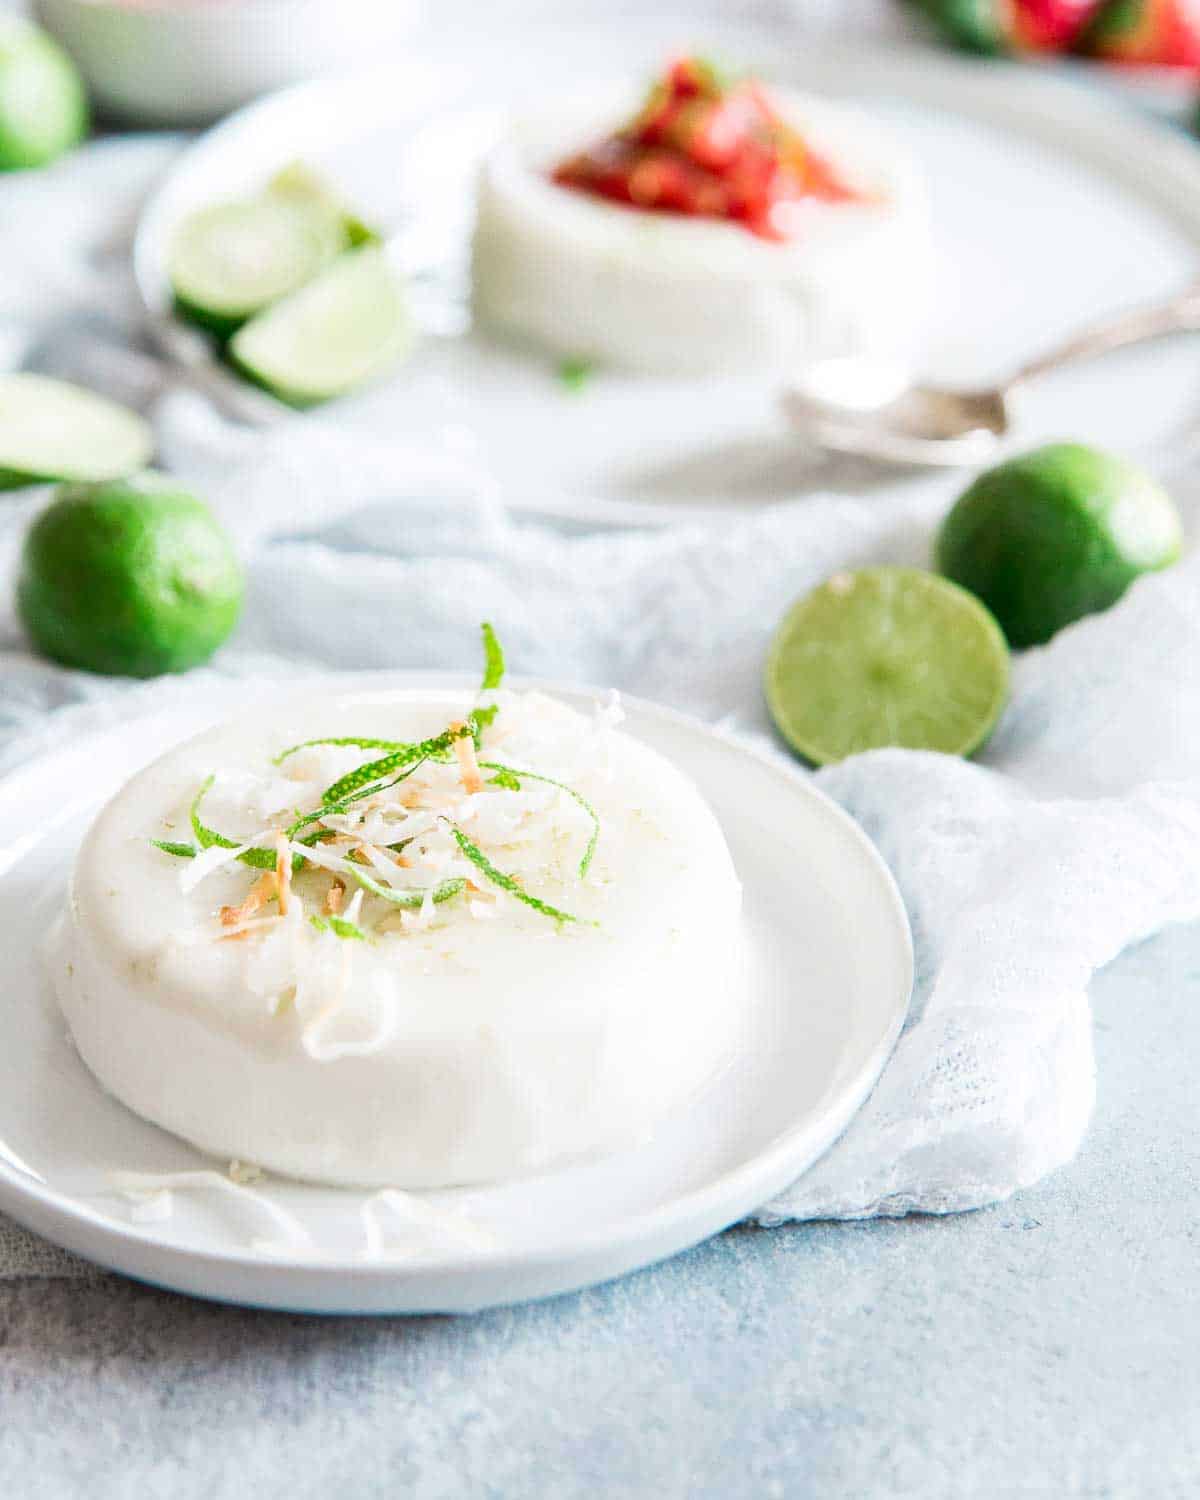 This key lime coconut panna cotta is made with coconut milk for a creamy, healthier twist to the classic recipe and topped with a key lime strawberry compote.